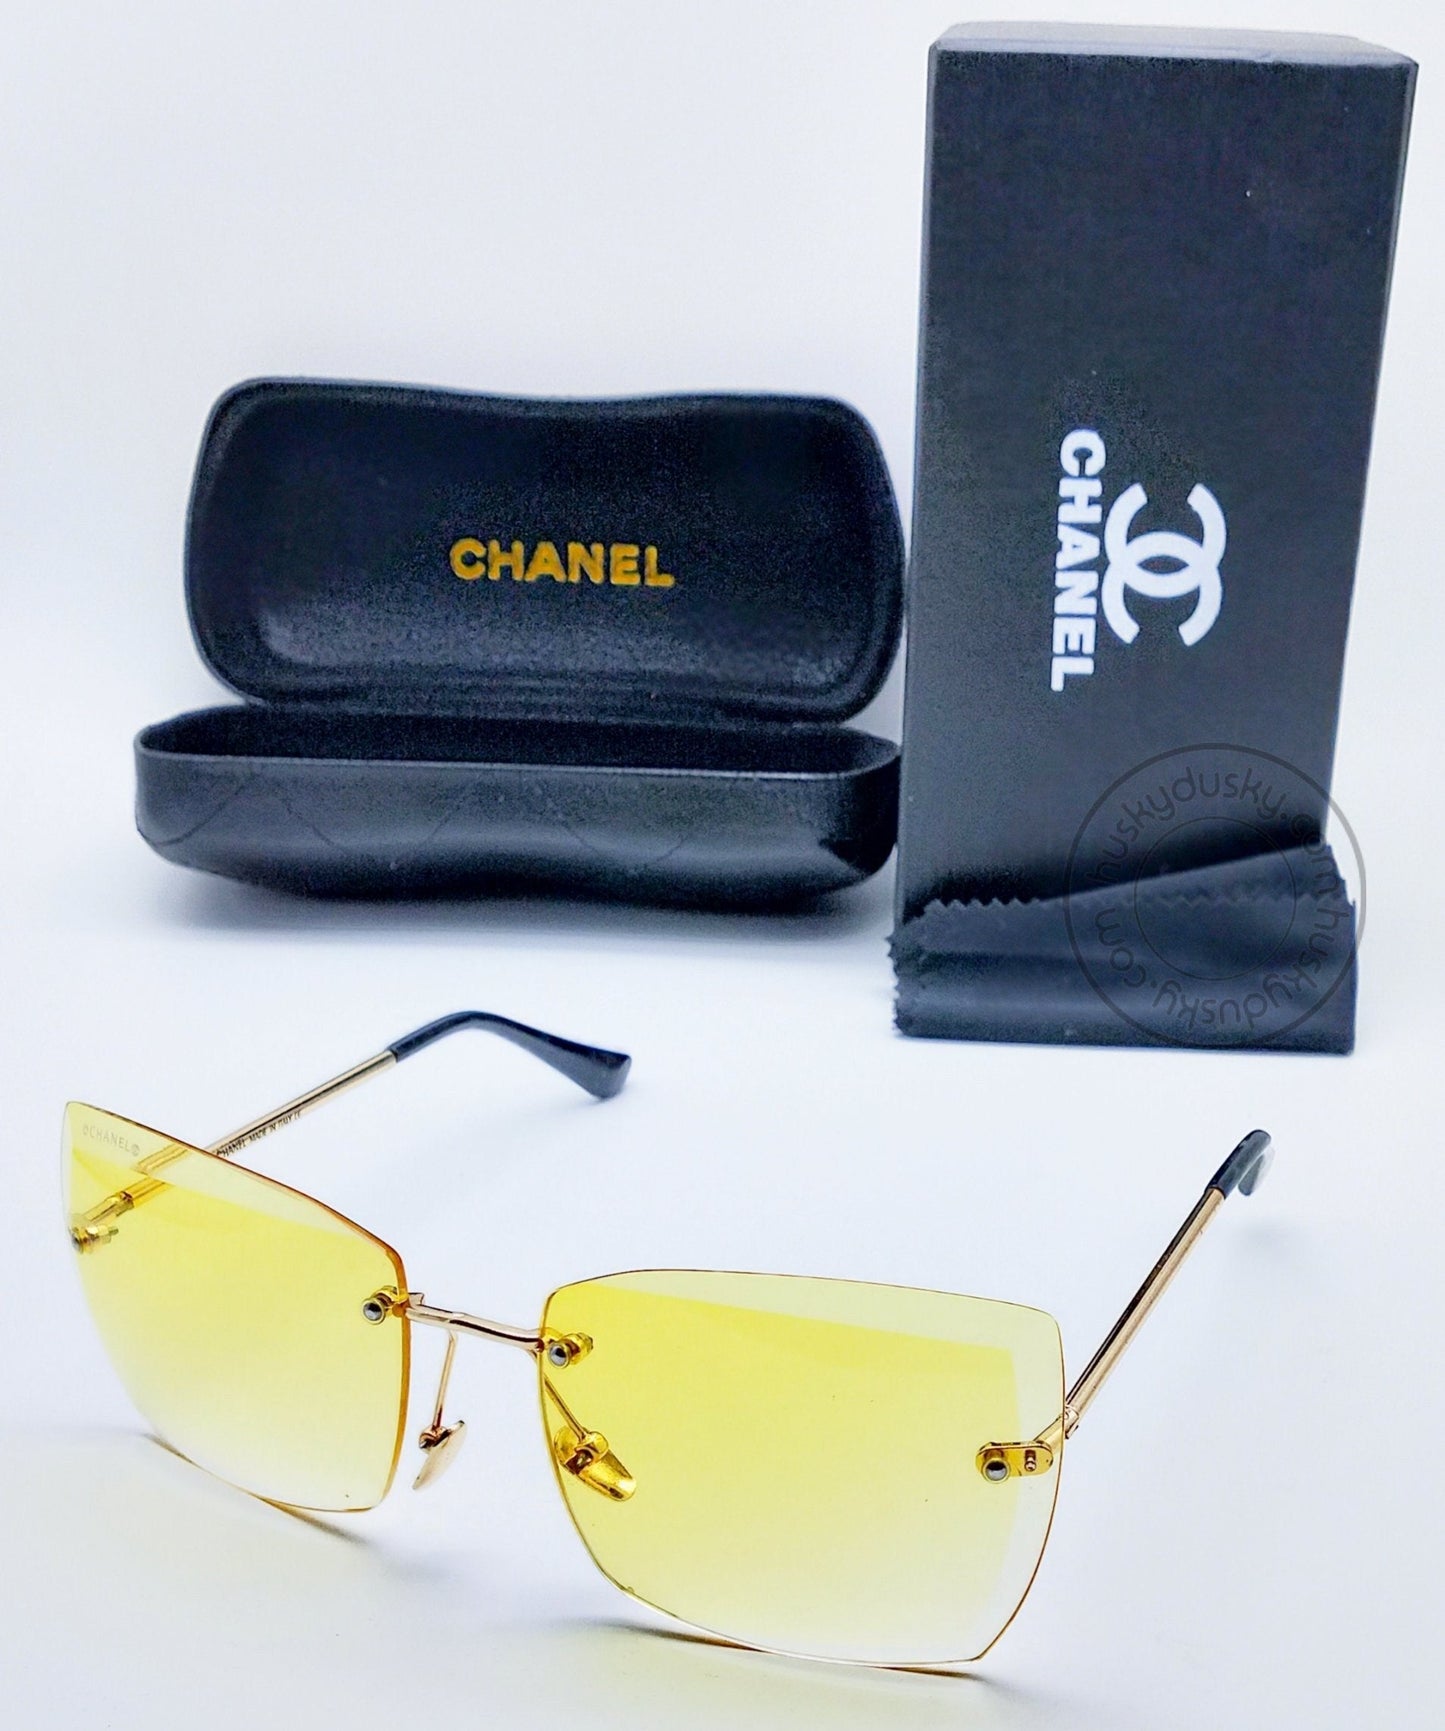 Chanel Branded Yellow Glass Men's Women's Sunglass For Man Woman or Girl CHA-92 Gold And Black Design Stick Gift Sunglass